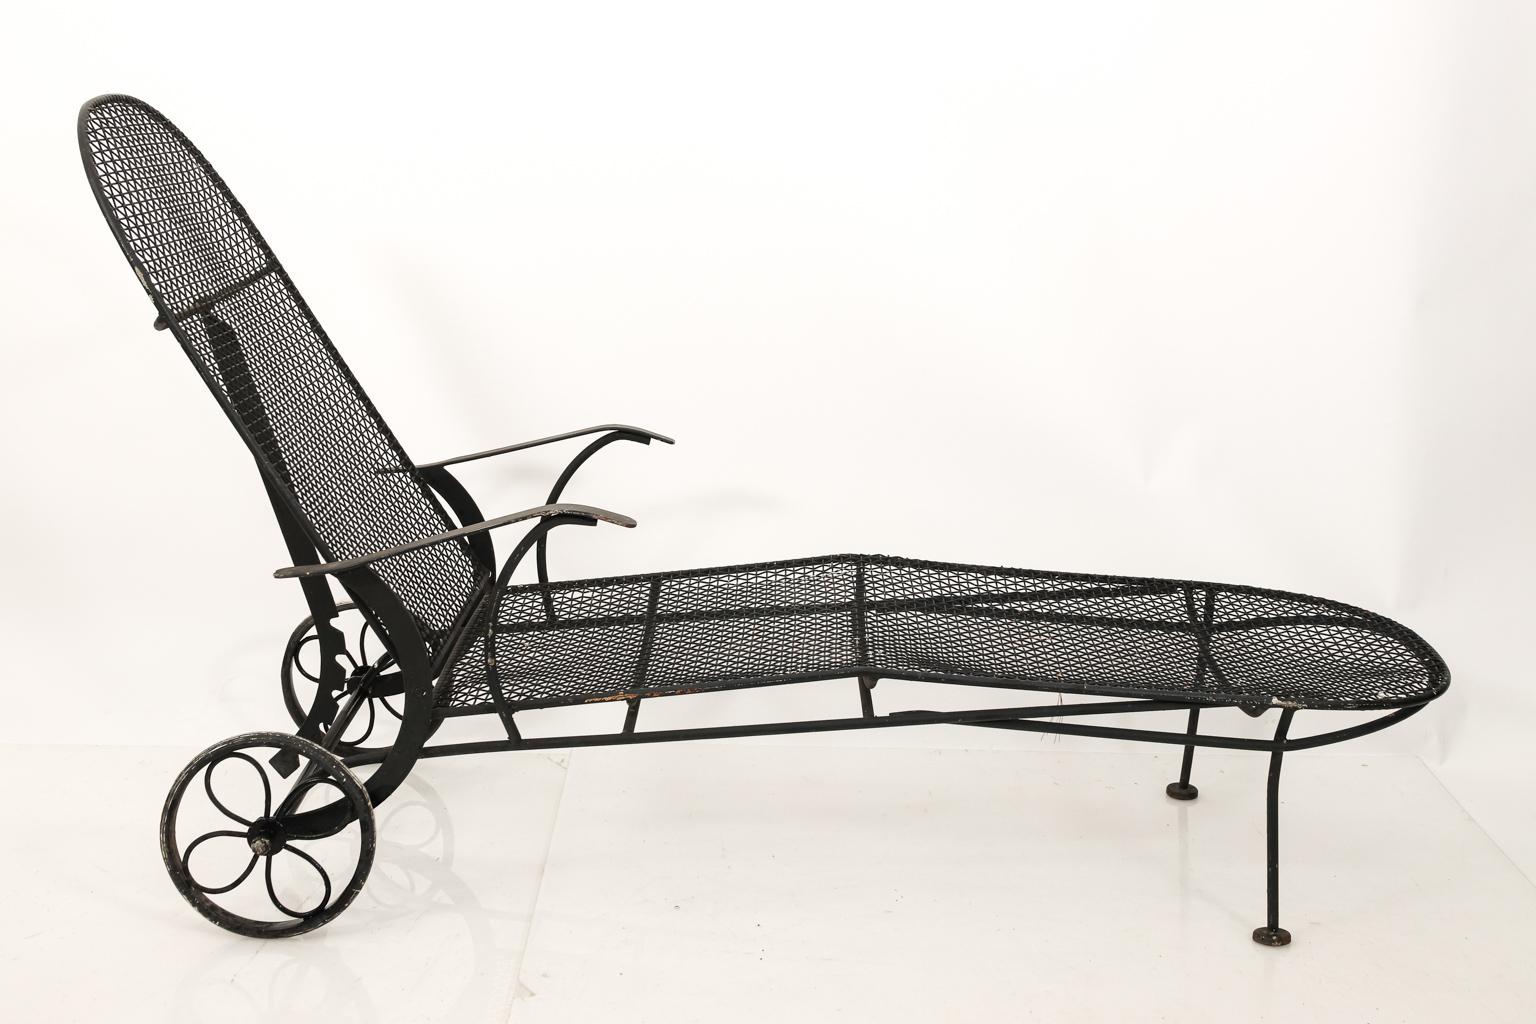 Garden or outdoor chaise lounge chair by Russell Woodard in the style of Sculptura. The chair also features a rounded back and mesh detail. Please note of wear consistent with age.